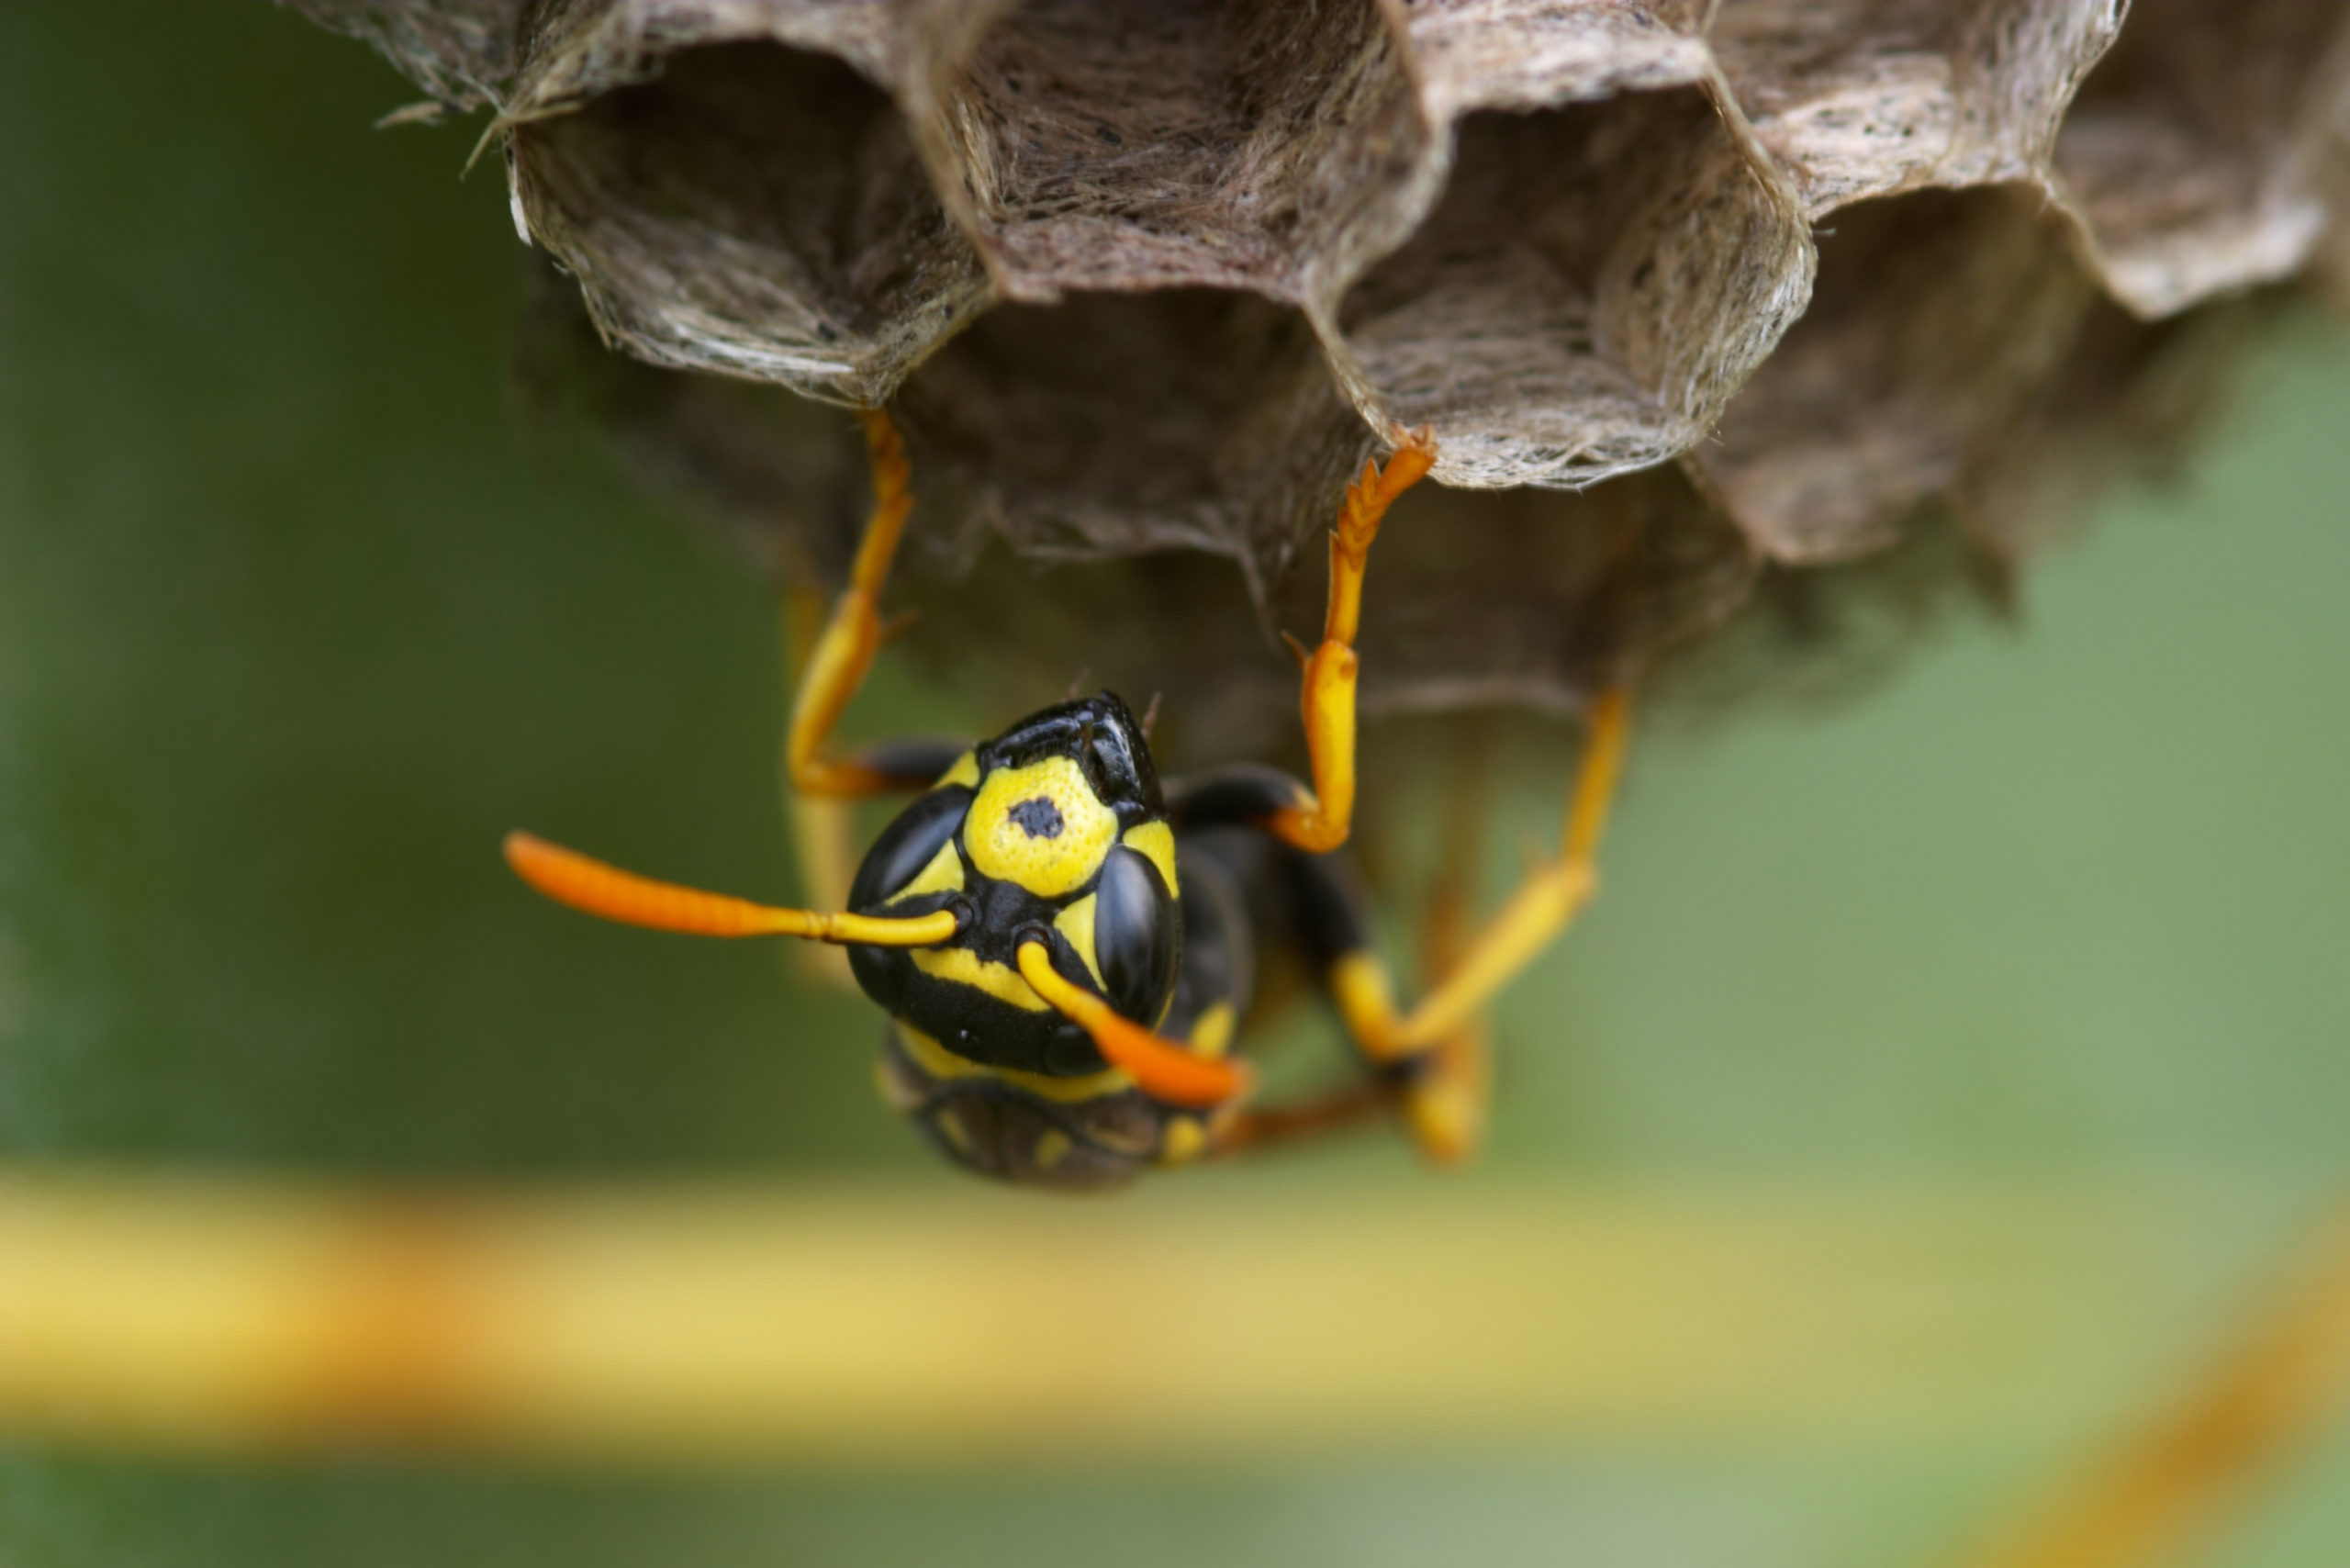 Florida wasp in it's hive